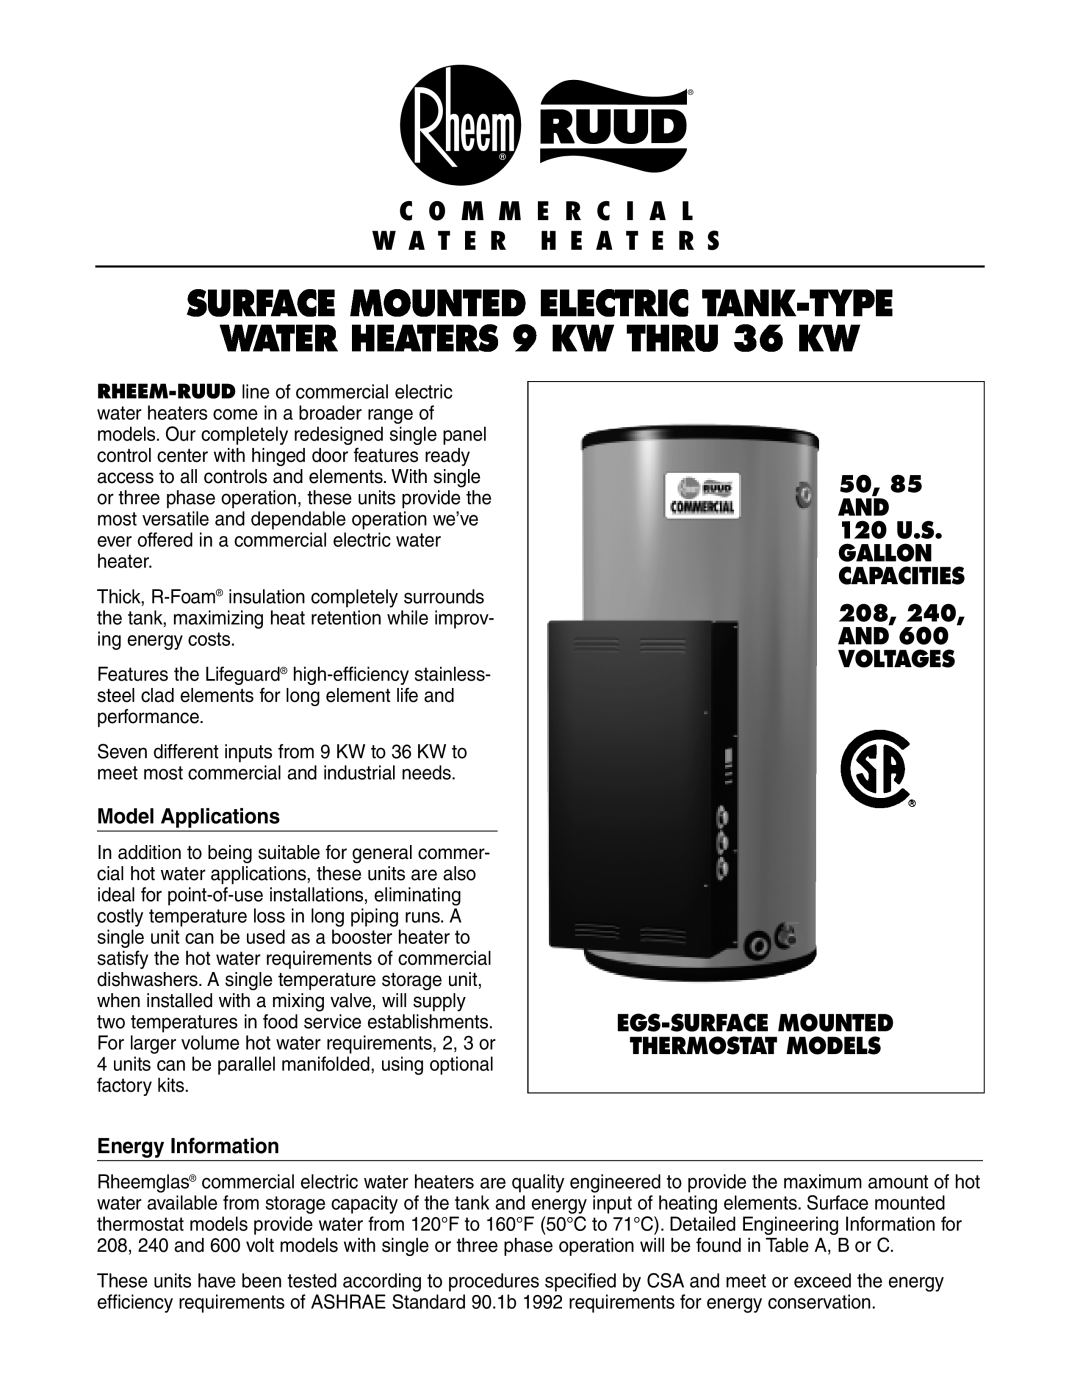 Rheem 9 Kw Thru 36 Kw manual 50, 85 AND 120 U.S GALLON CAPACITIES 208, 240, AND 600 VOLTAGES 